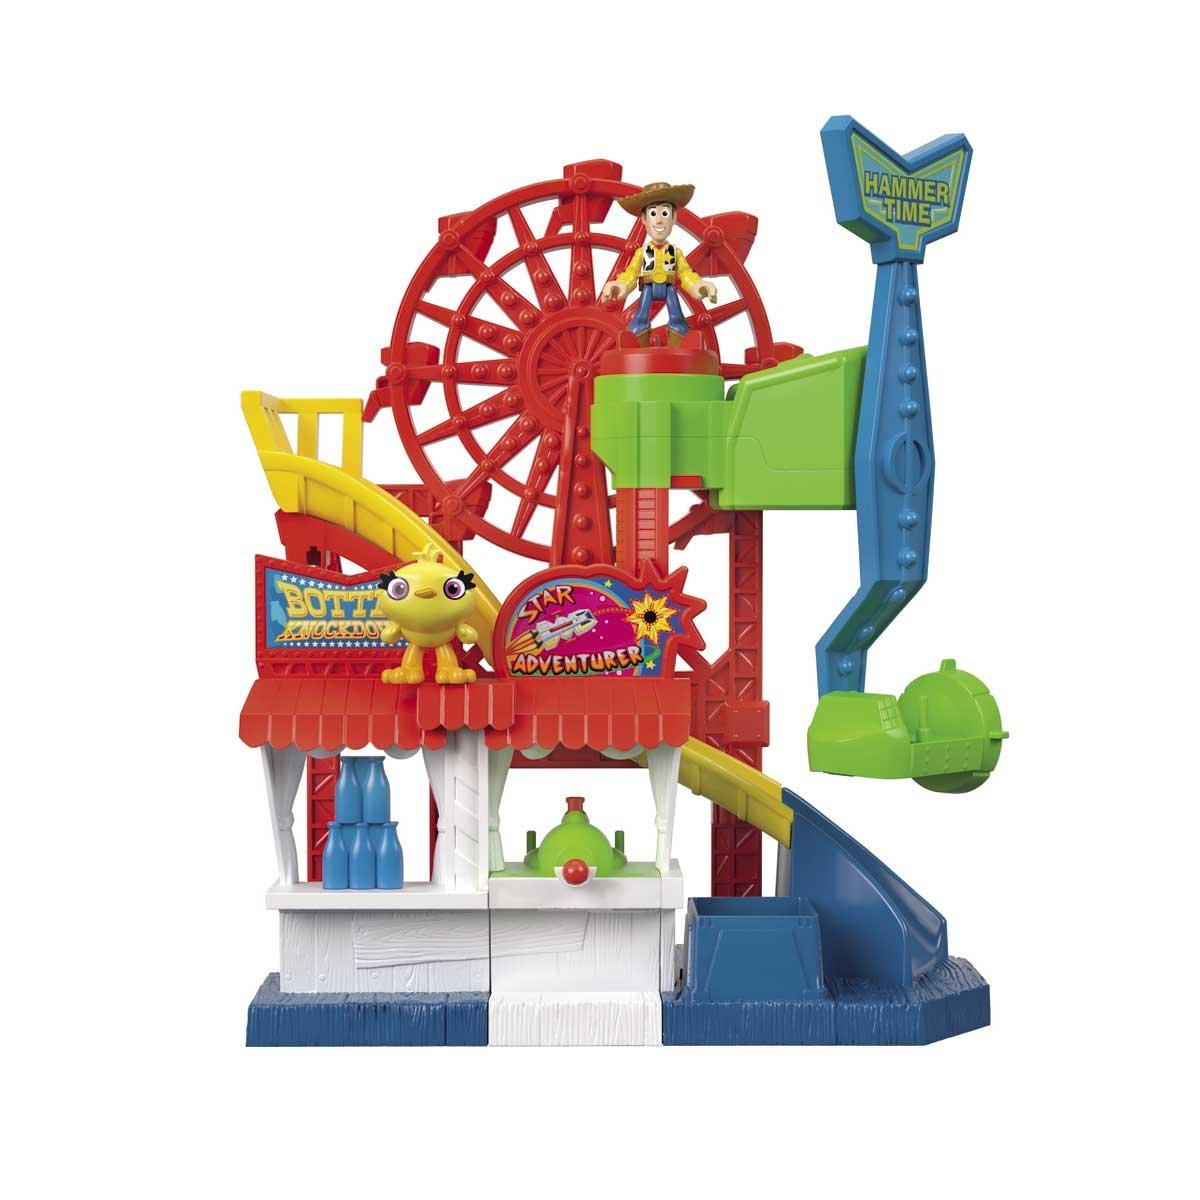 Parque Divertido Toy Story 4  Fisher Price